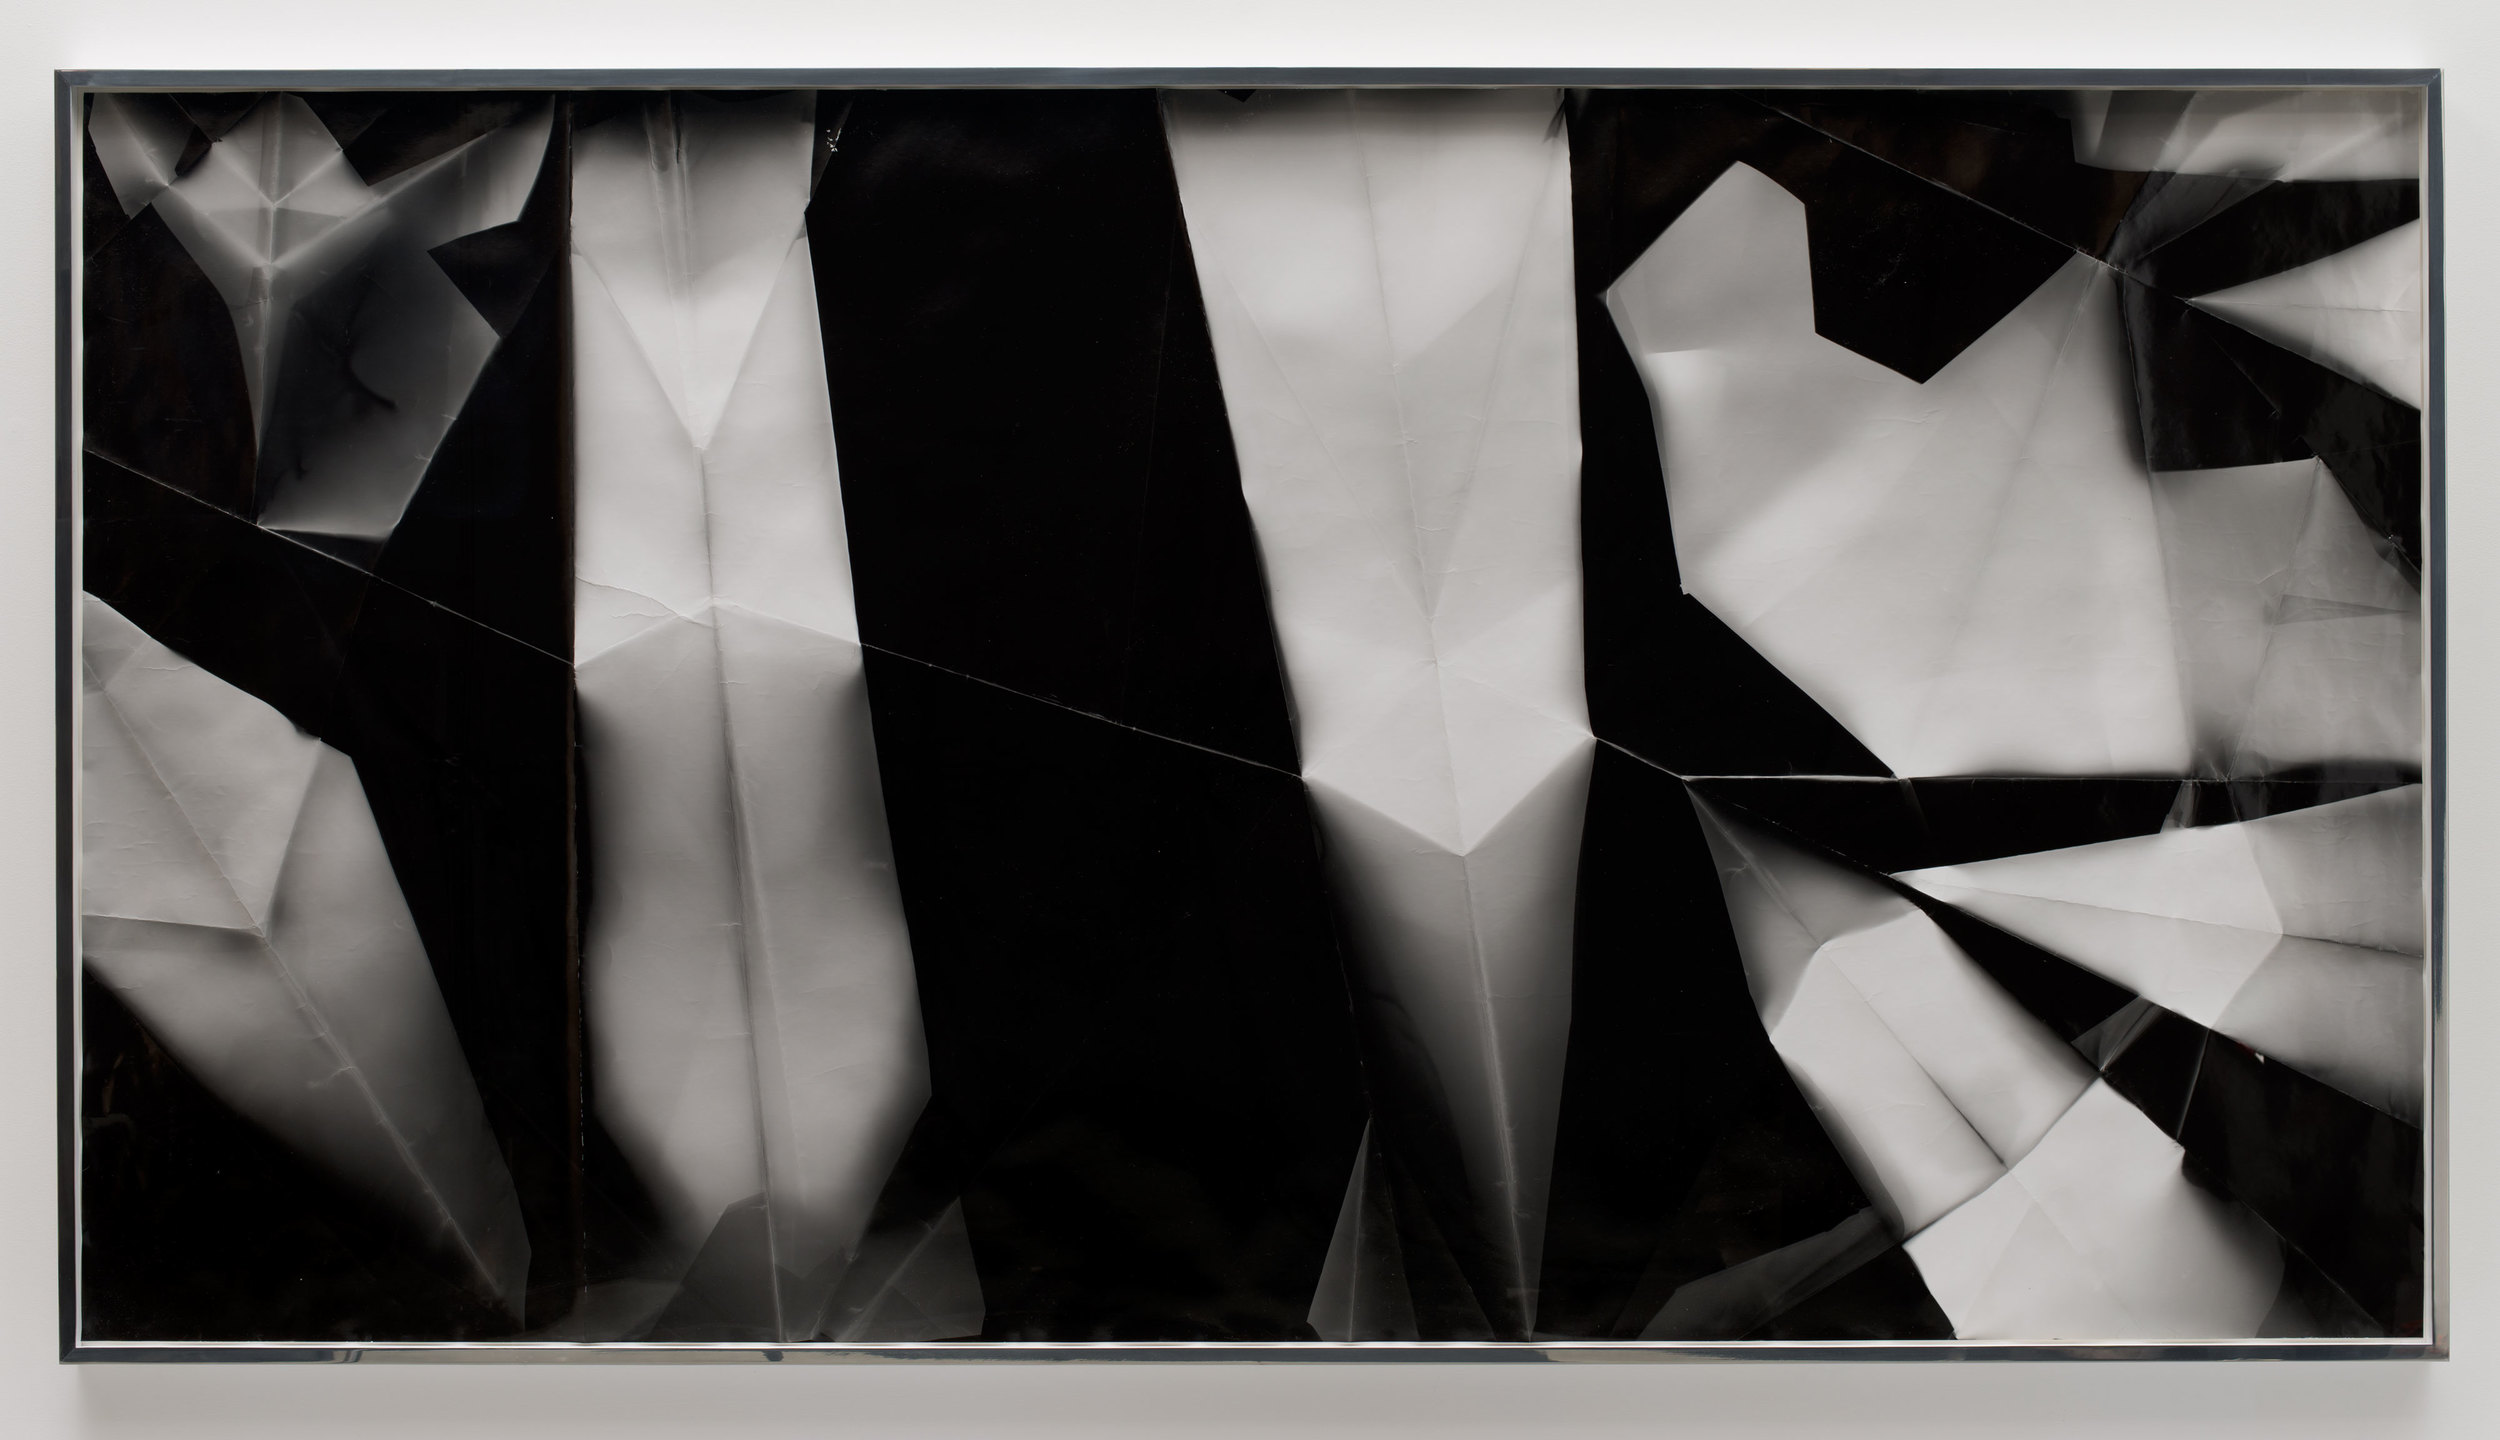   Fold (30º/90º/150º/210º directional light sources), December 31,&nbsp;2012, Los Angeles, California, Ilford Multigrade IV MGF.1K    2012   Black and white fiber based photographic paper  56 x 107 1/2 inches 